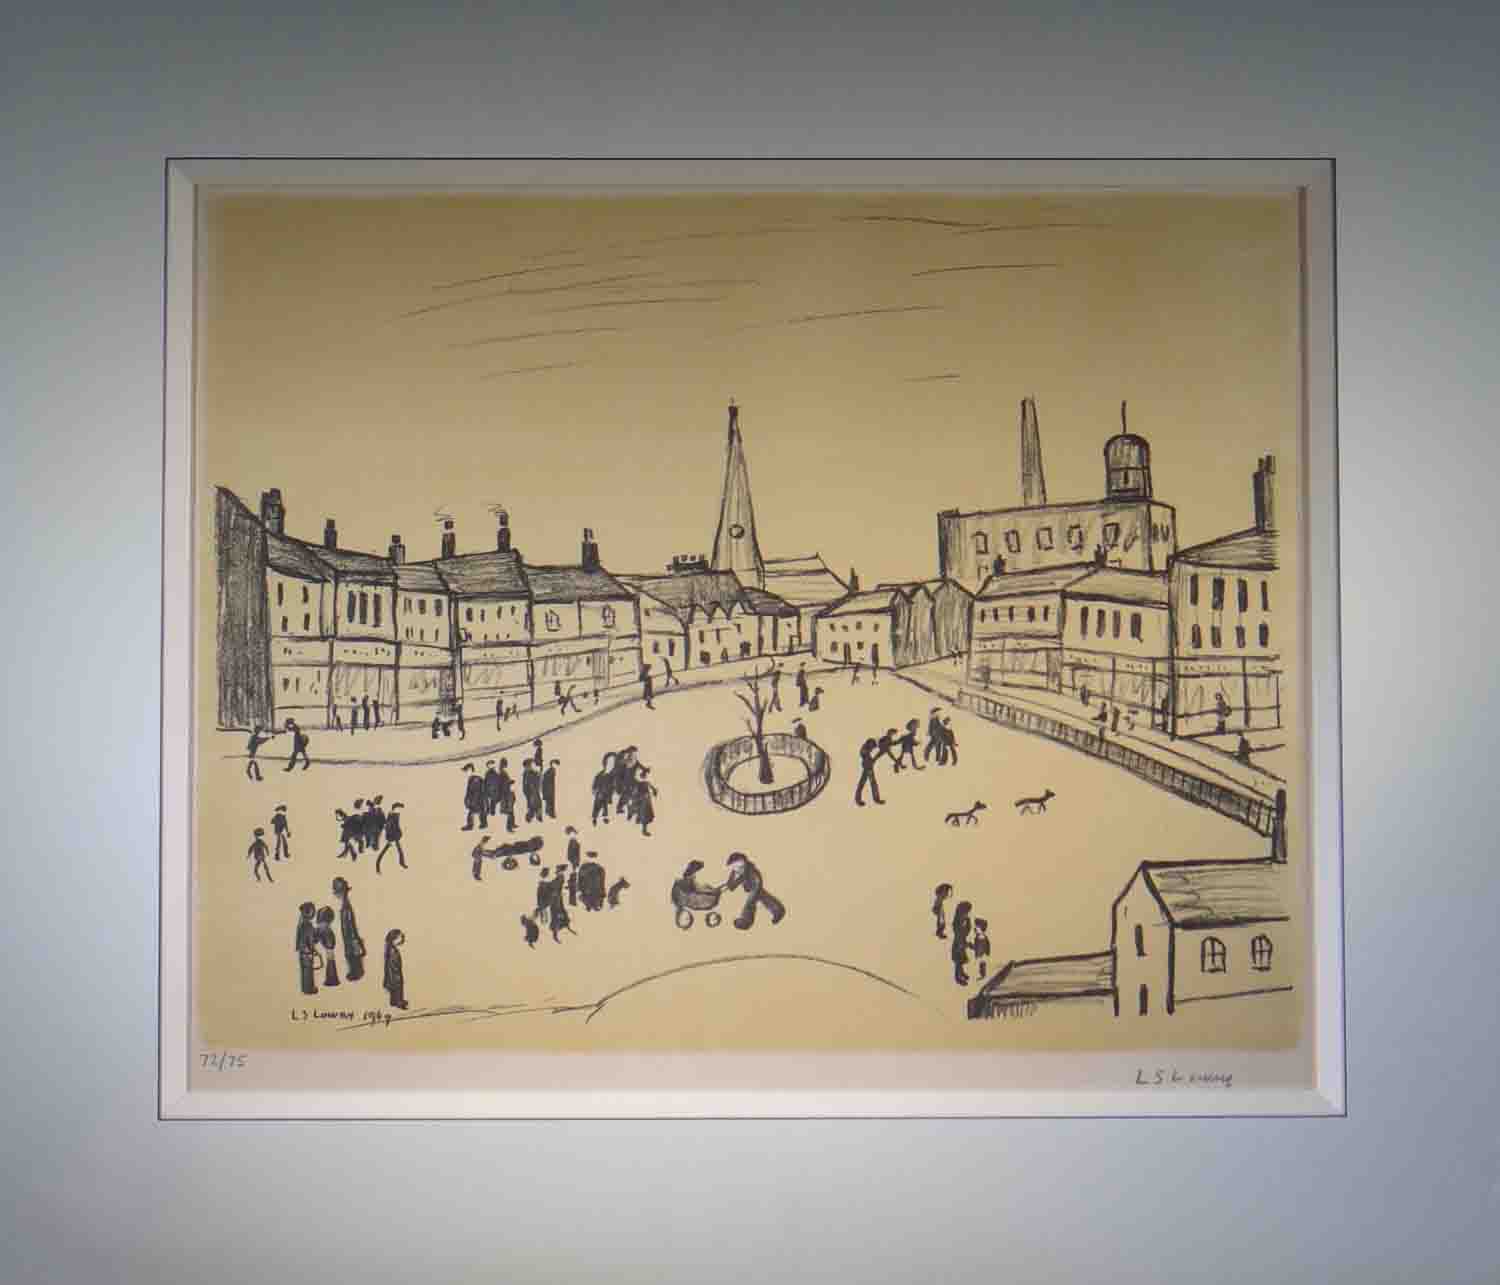 lowry, Tree in a square, signed print lslowry